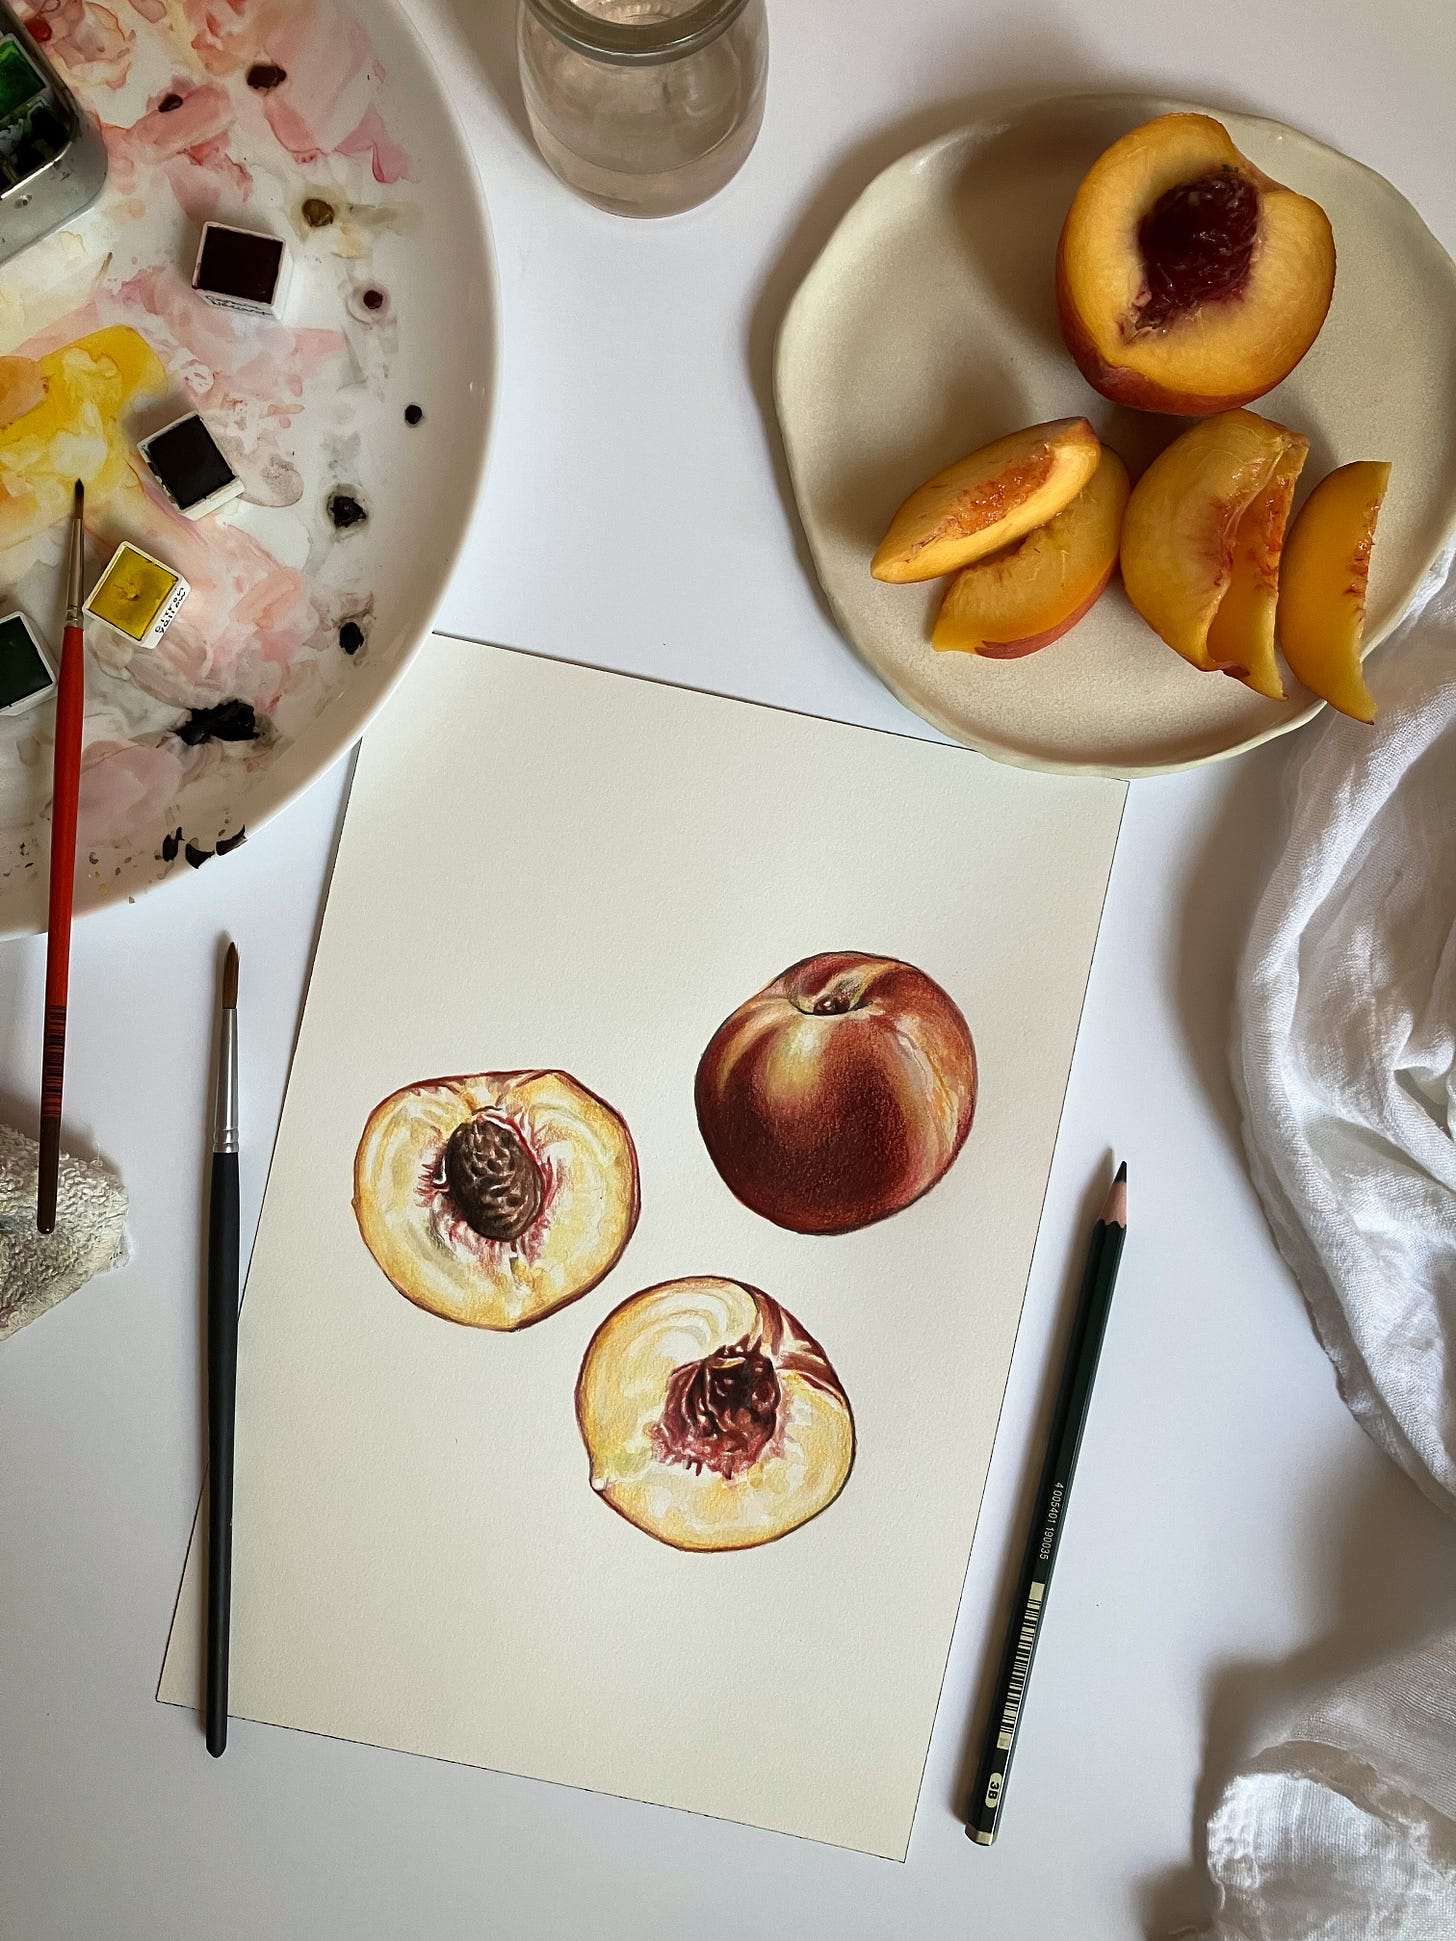 a photo from above of the peach painting being created, with real peach slices on a plate above the painting, and watercolor paints and brushes to the left